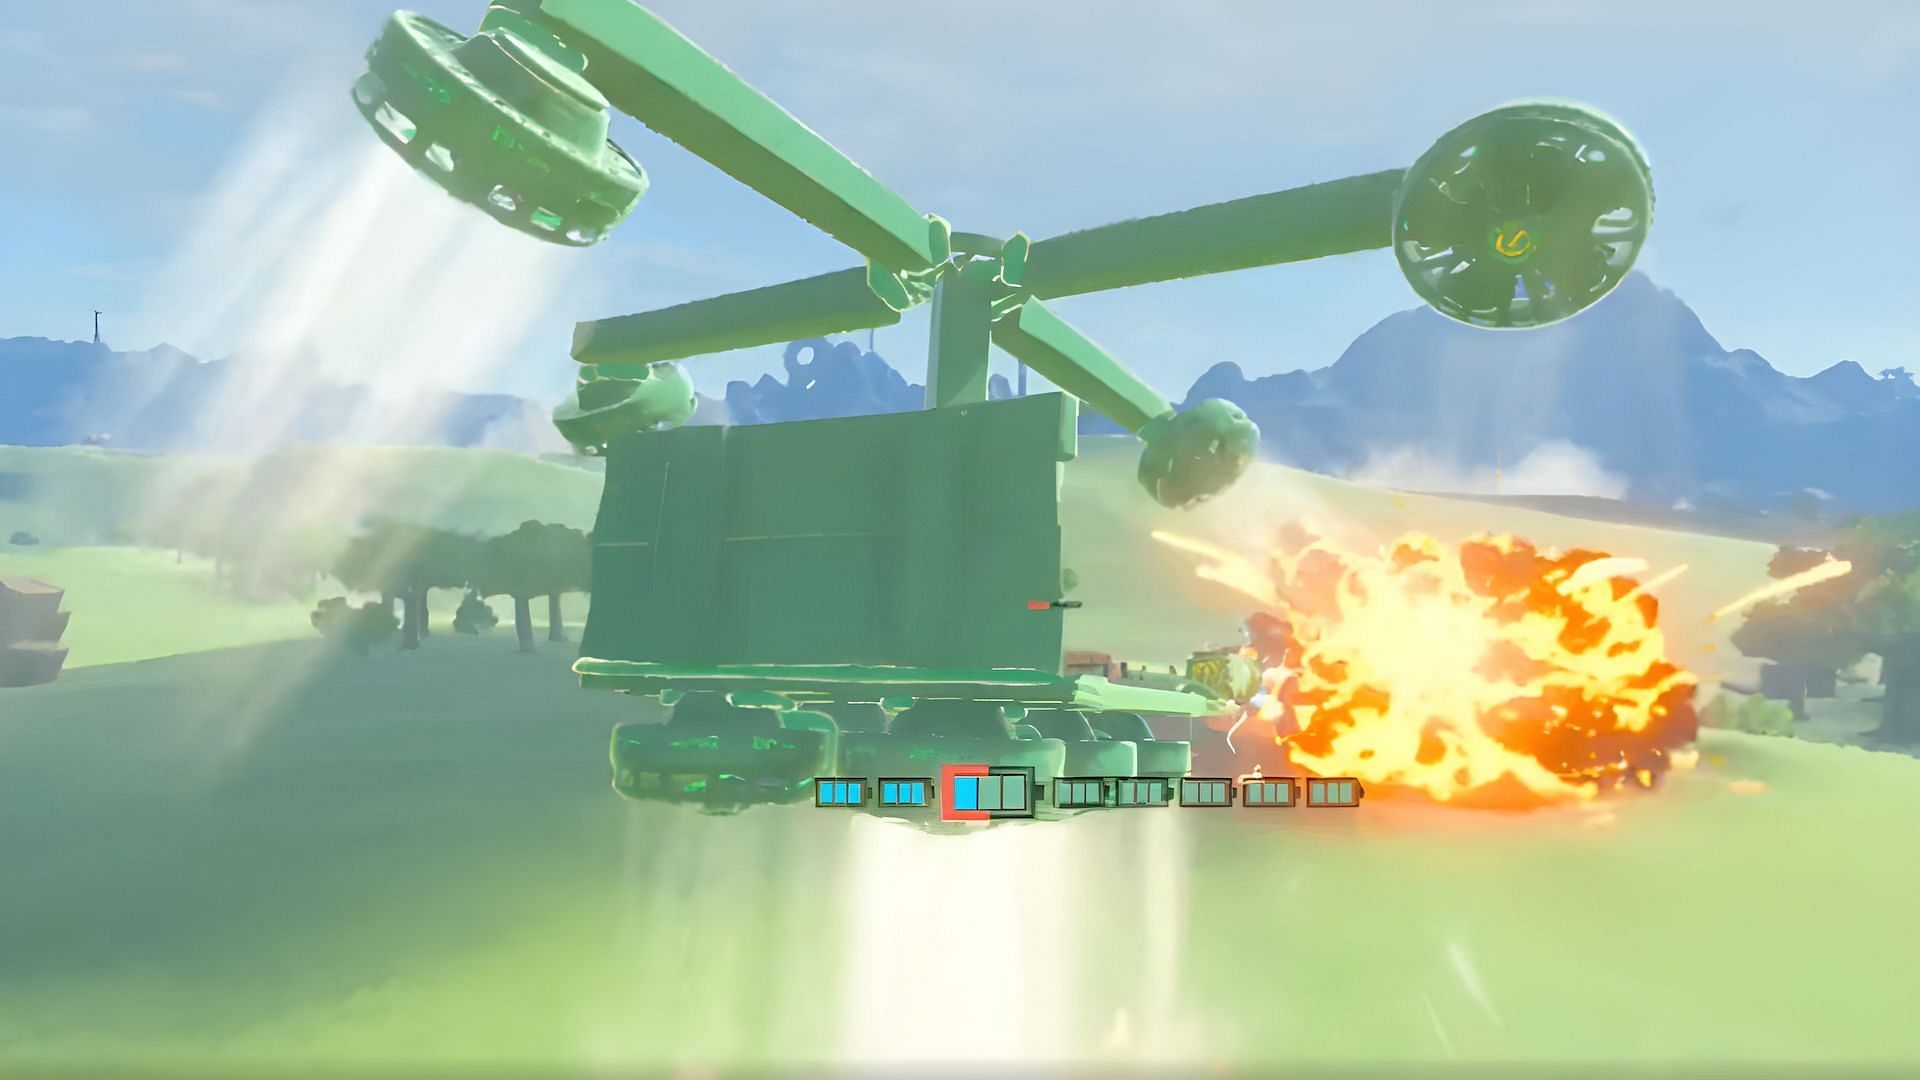 The Attack Helicopter in Tears of the Kingdom (Image via zeldabuilds/squishguin)